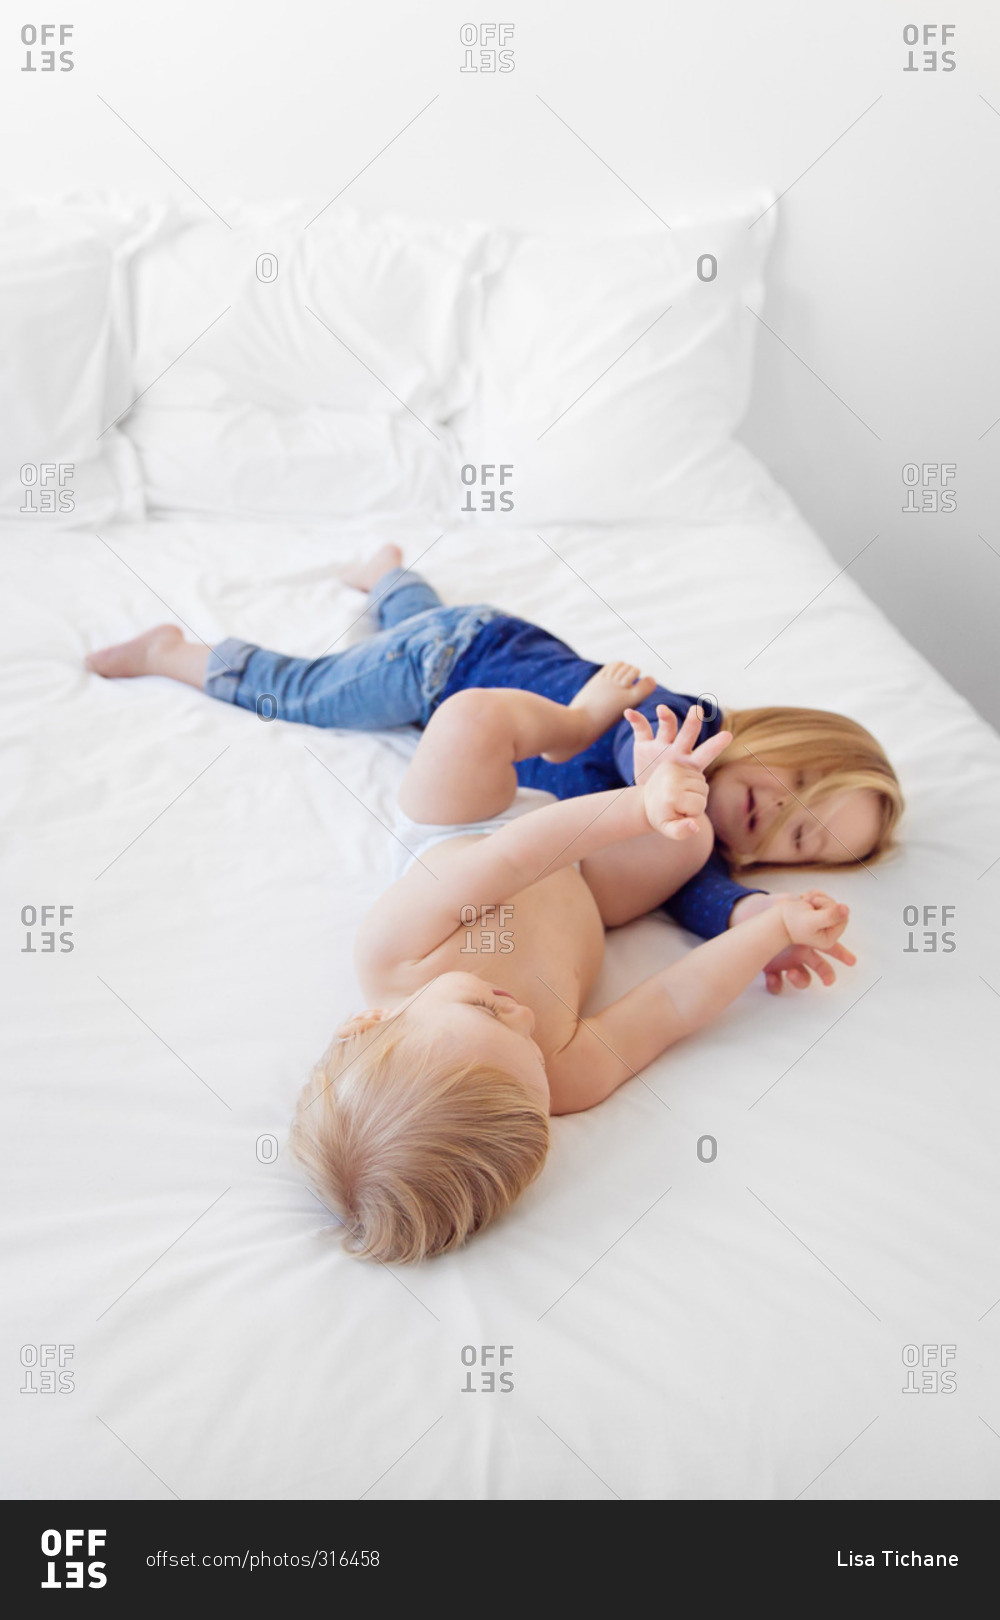 Brother and sister wrestling on a white bed